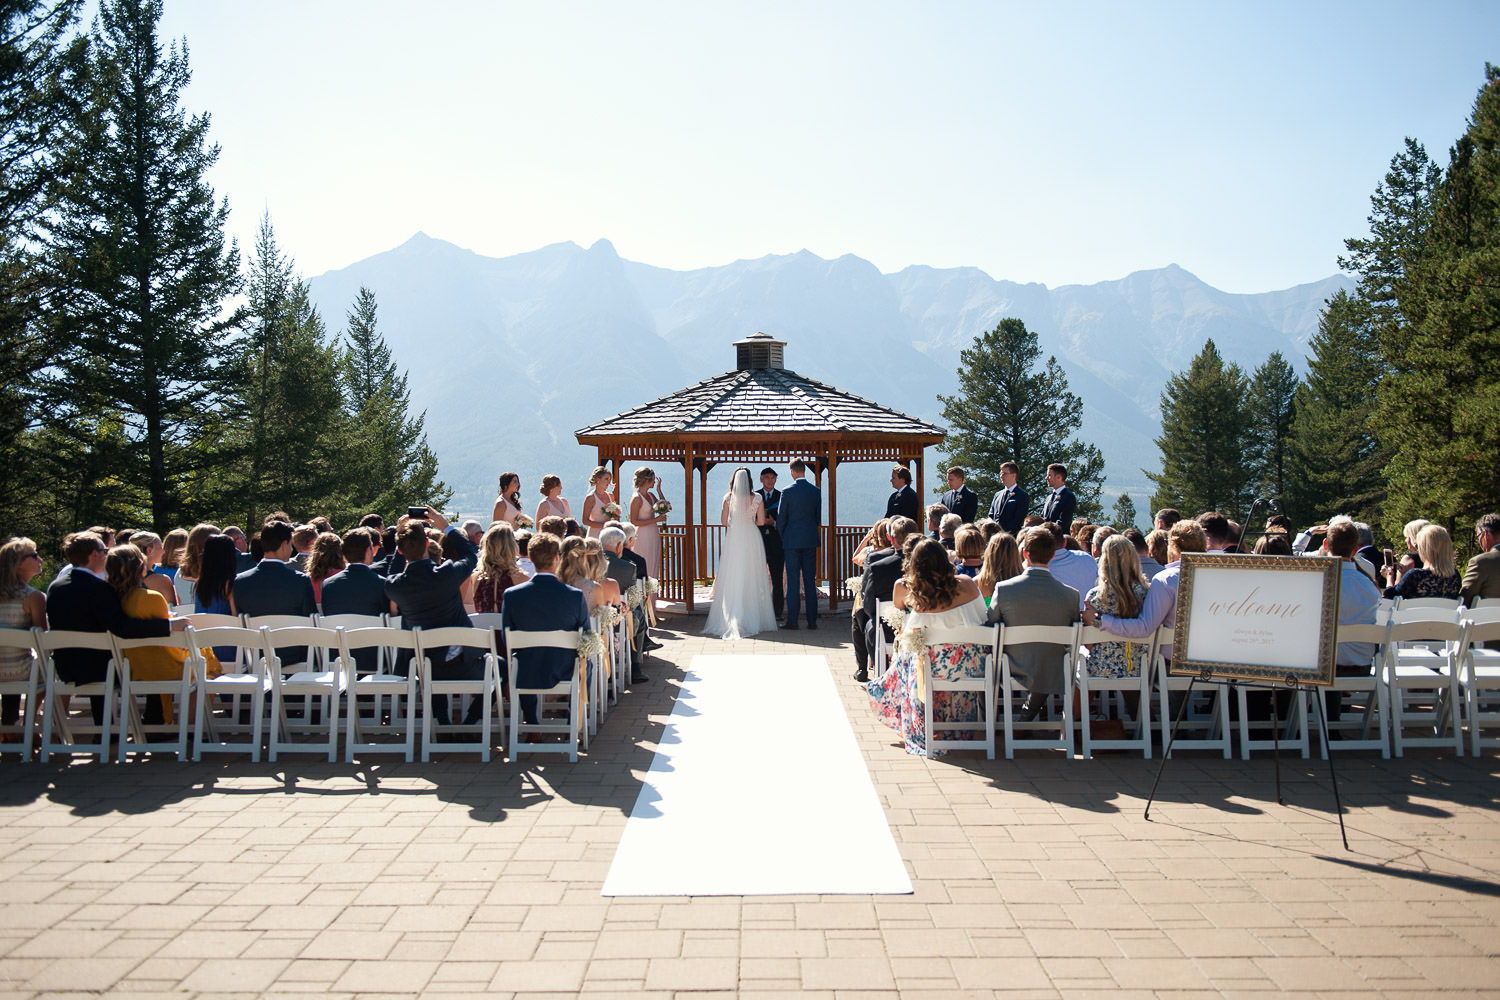 Wedding ceremony at Silvertip in Canmore captured by Tara Whittaker Photography